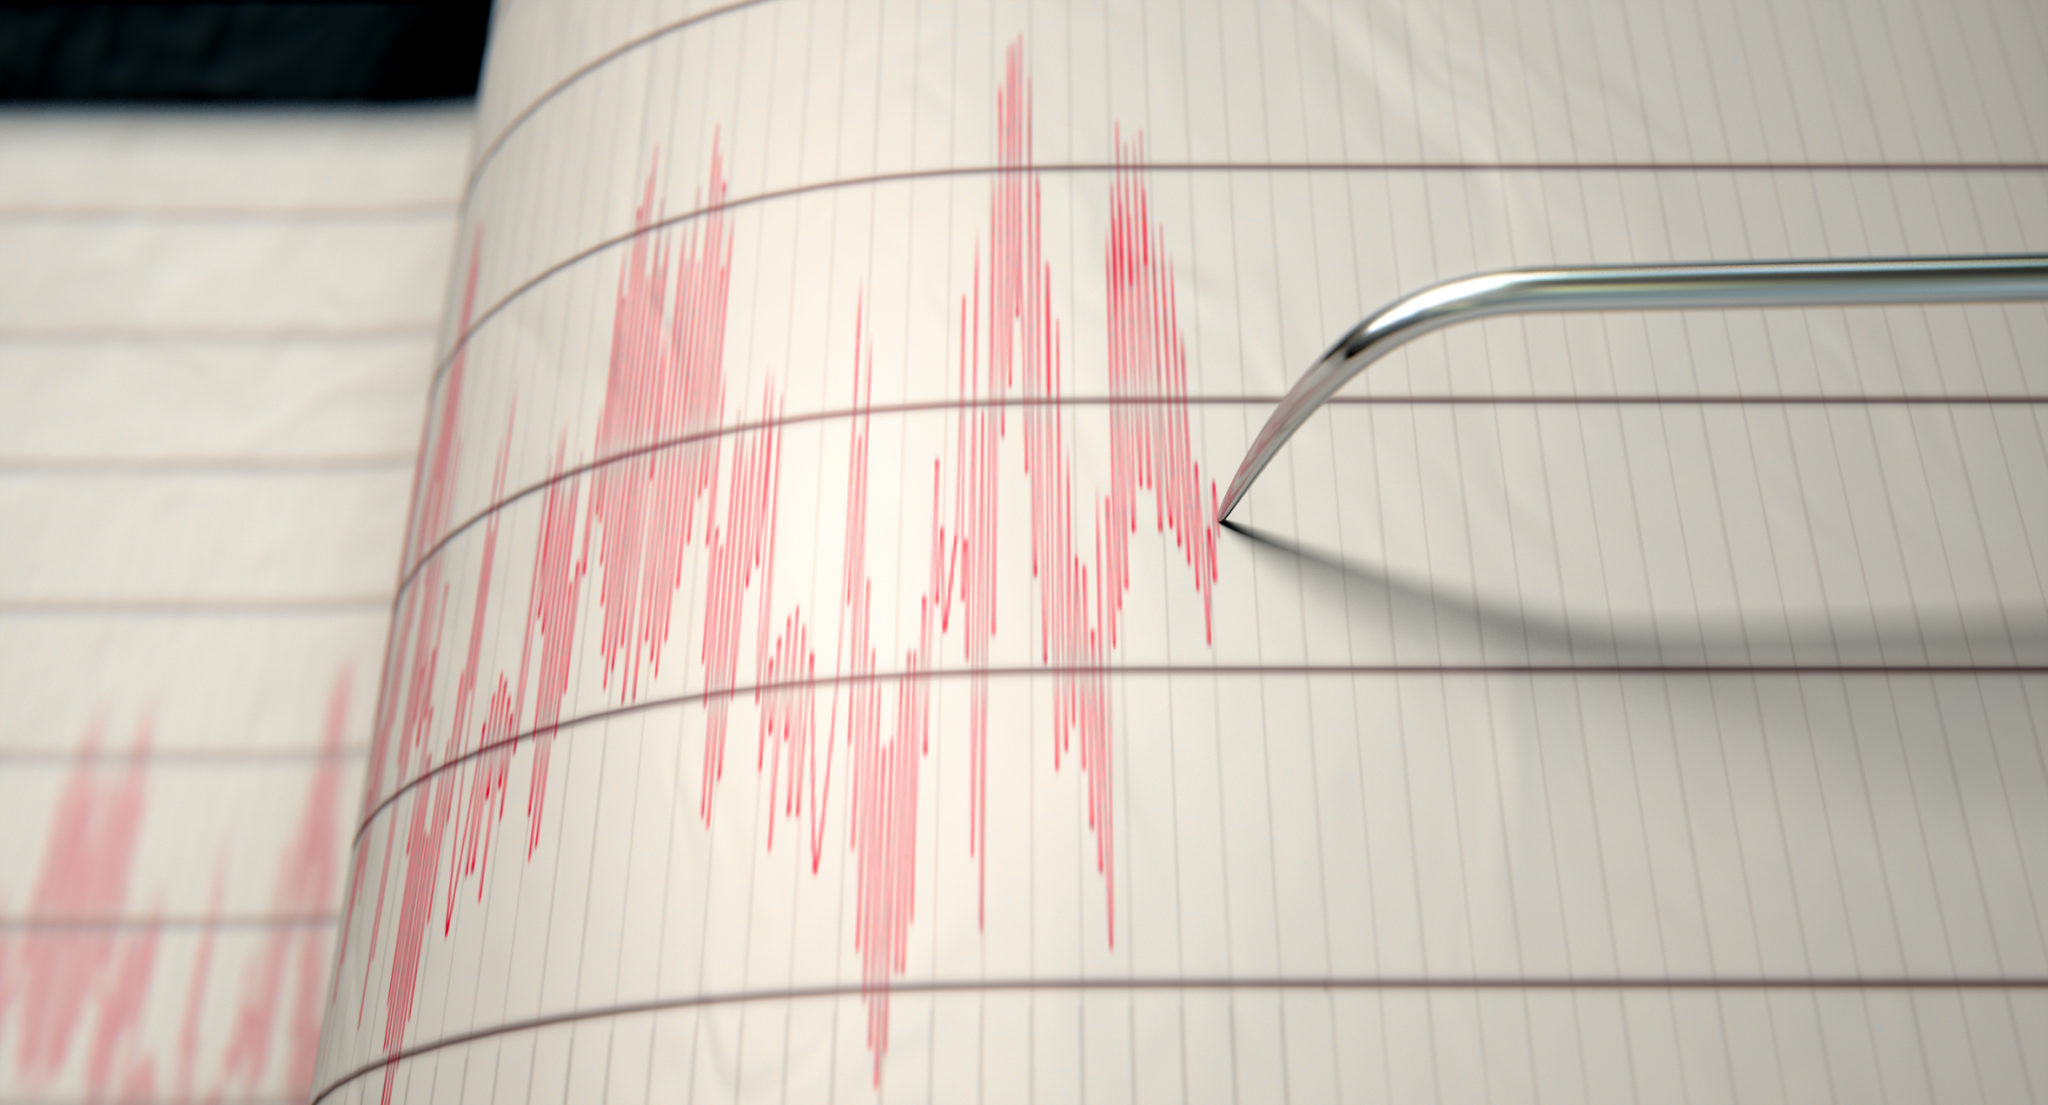 Two earthquakes were recorded near Odessa, Texas.

Getty Images